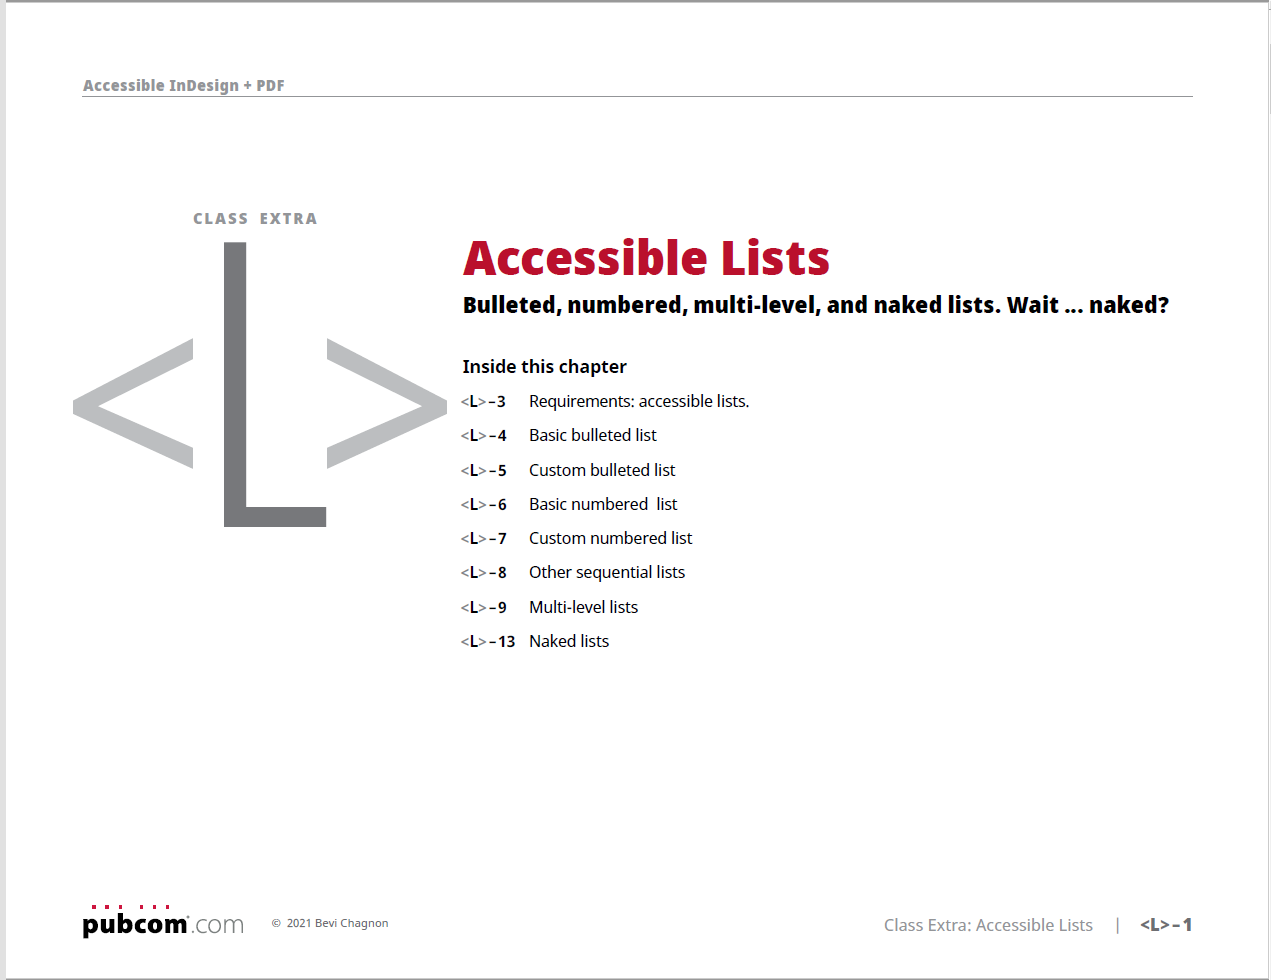 Cover of accessible lists in InDesign.